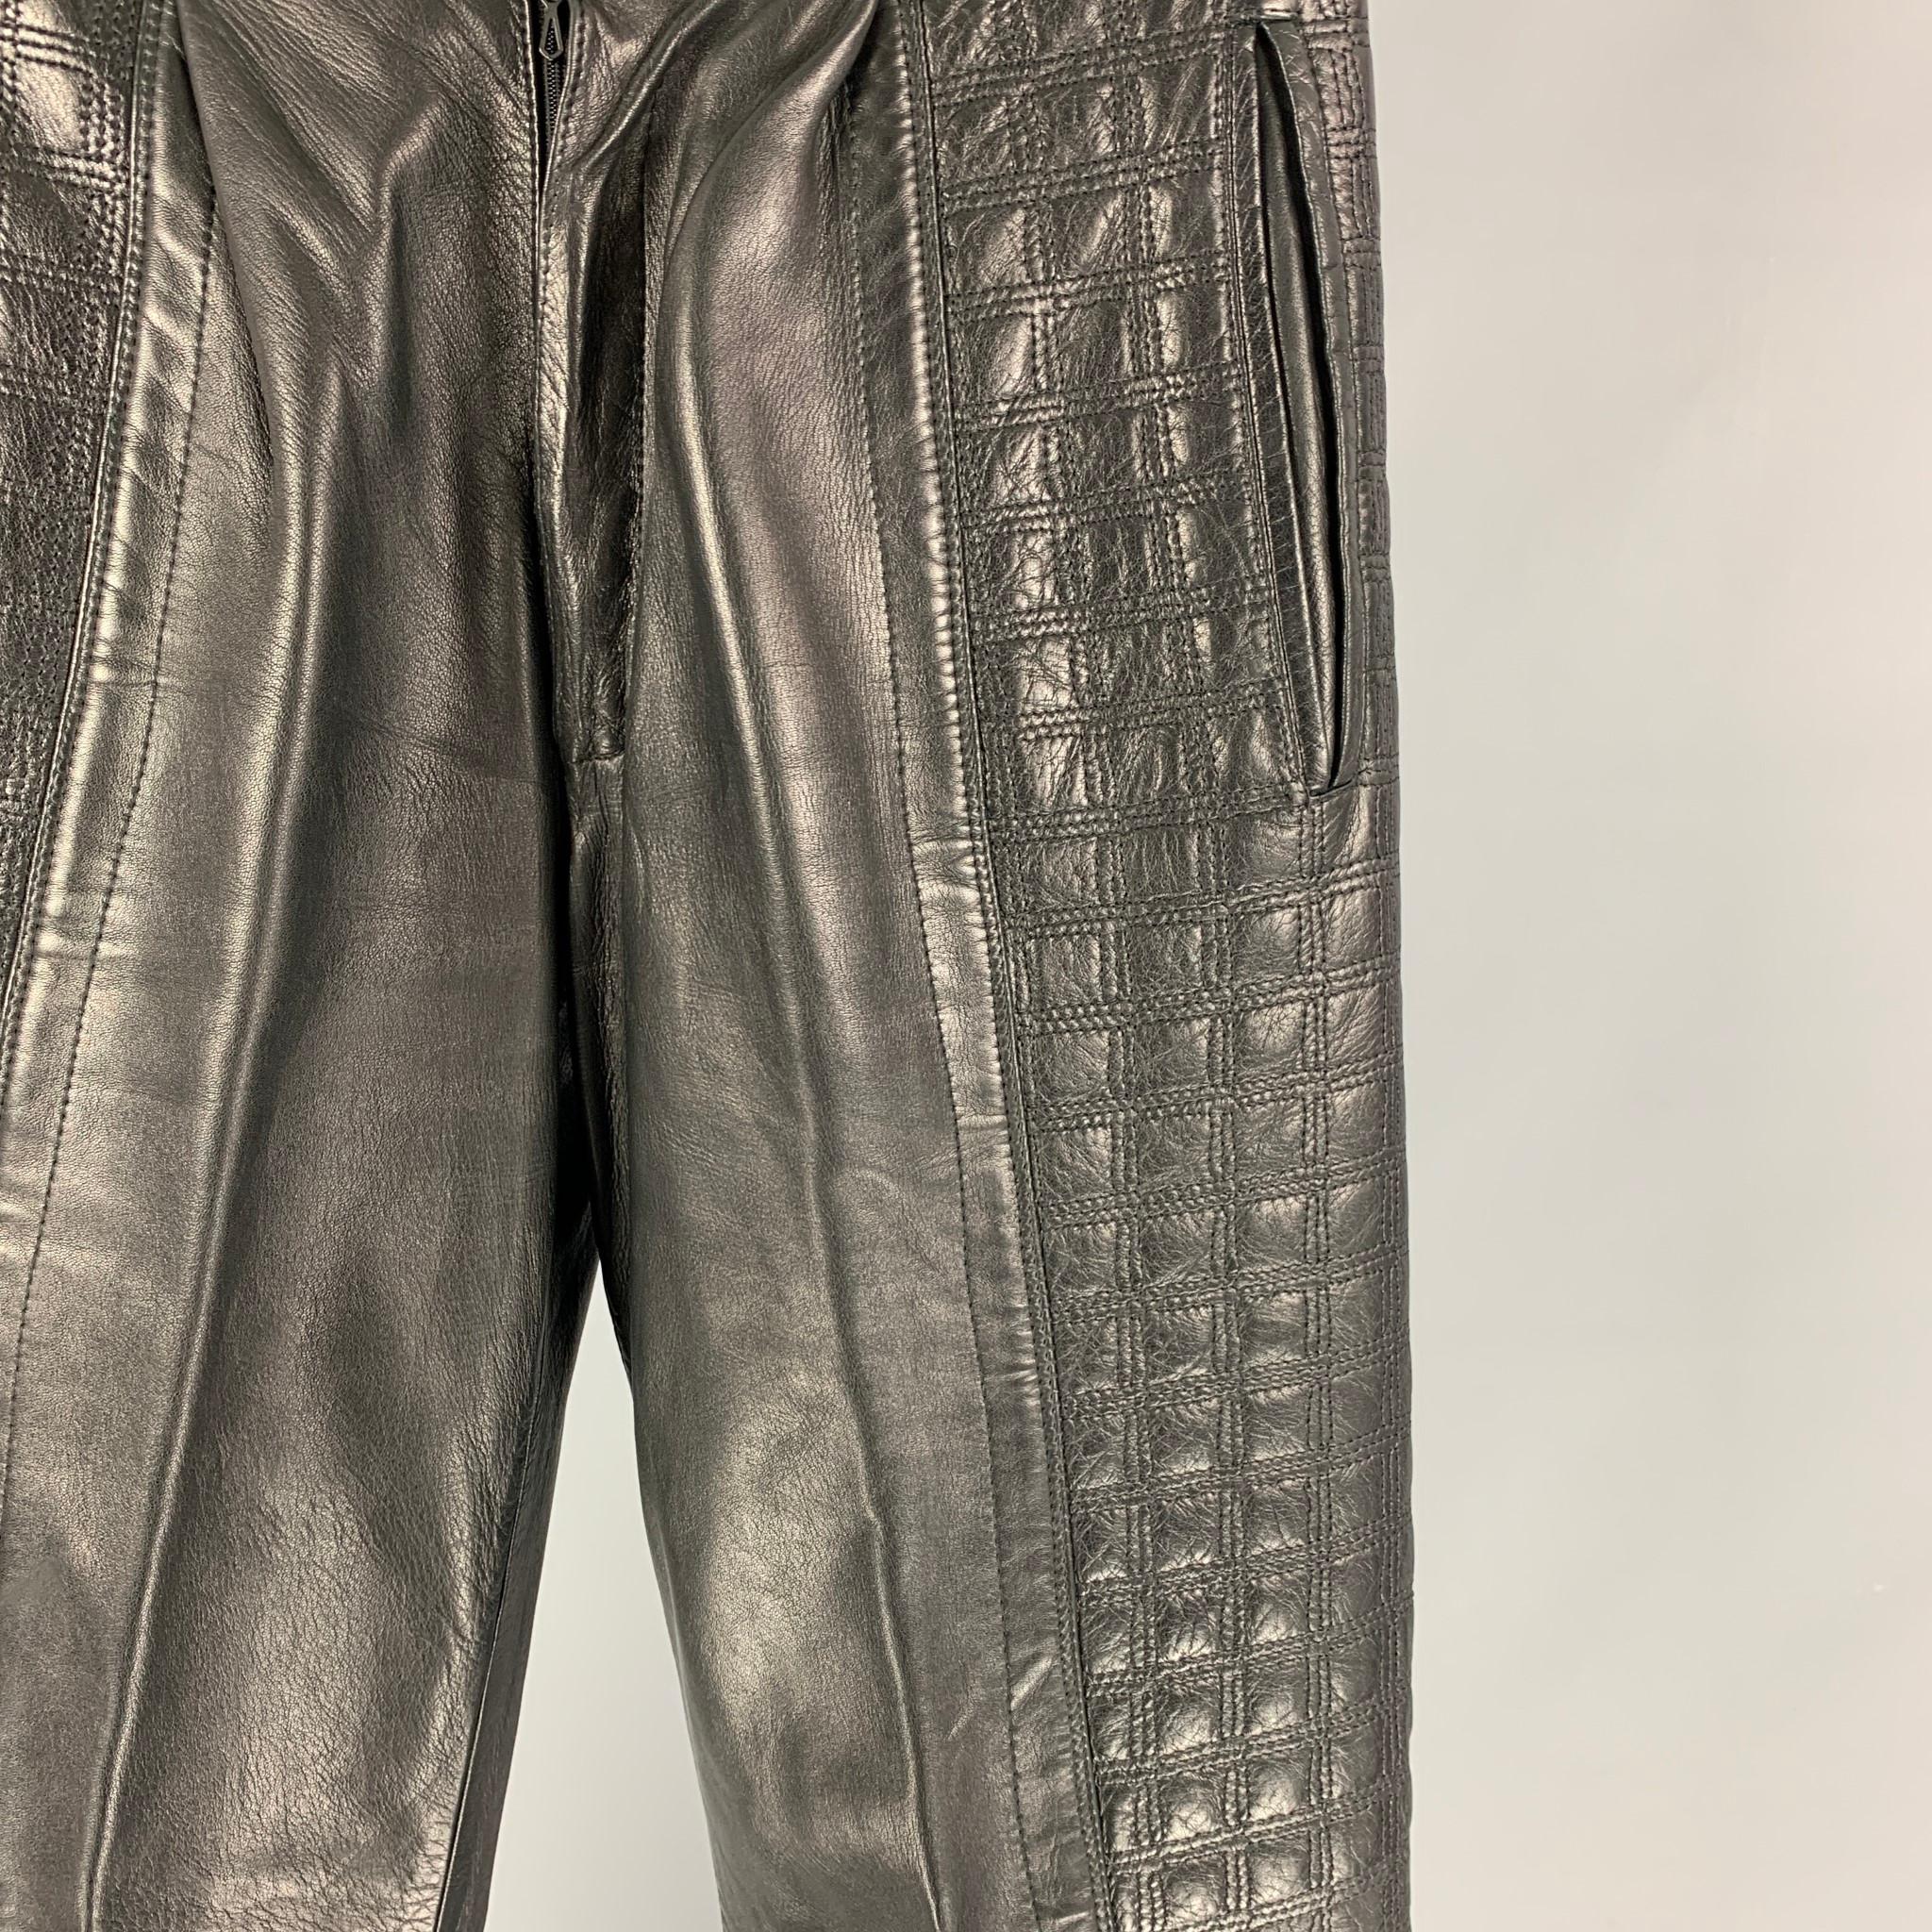 GIANNI VERSACE casual pants comes in a black quilted leather featuring top stitching, pleated front, slit pockets, and a zip fly closure. 

Very Good Pre-Owned Condition. Fabric tag removed.
Marked: Size tag removed.

Measurements:

Waist: 29